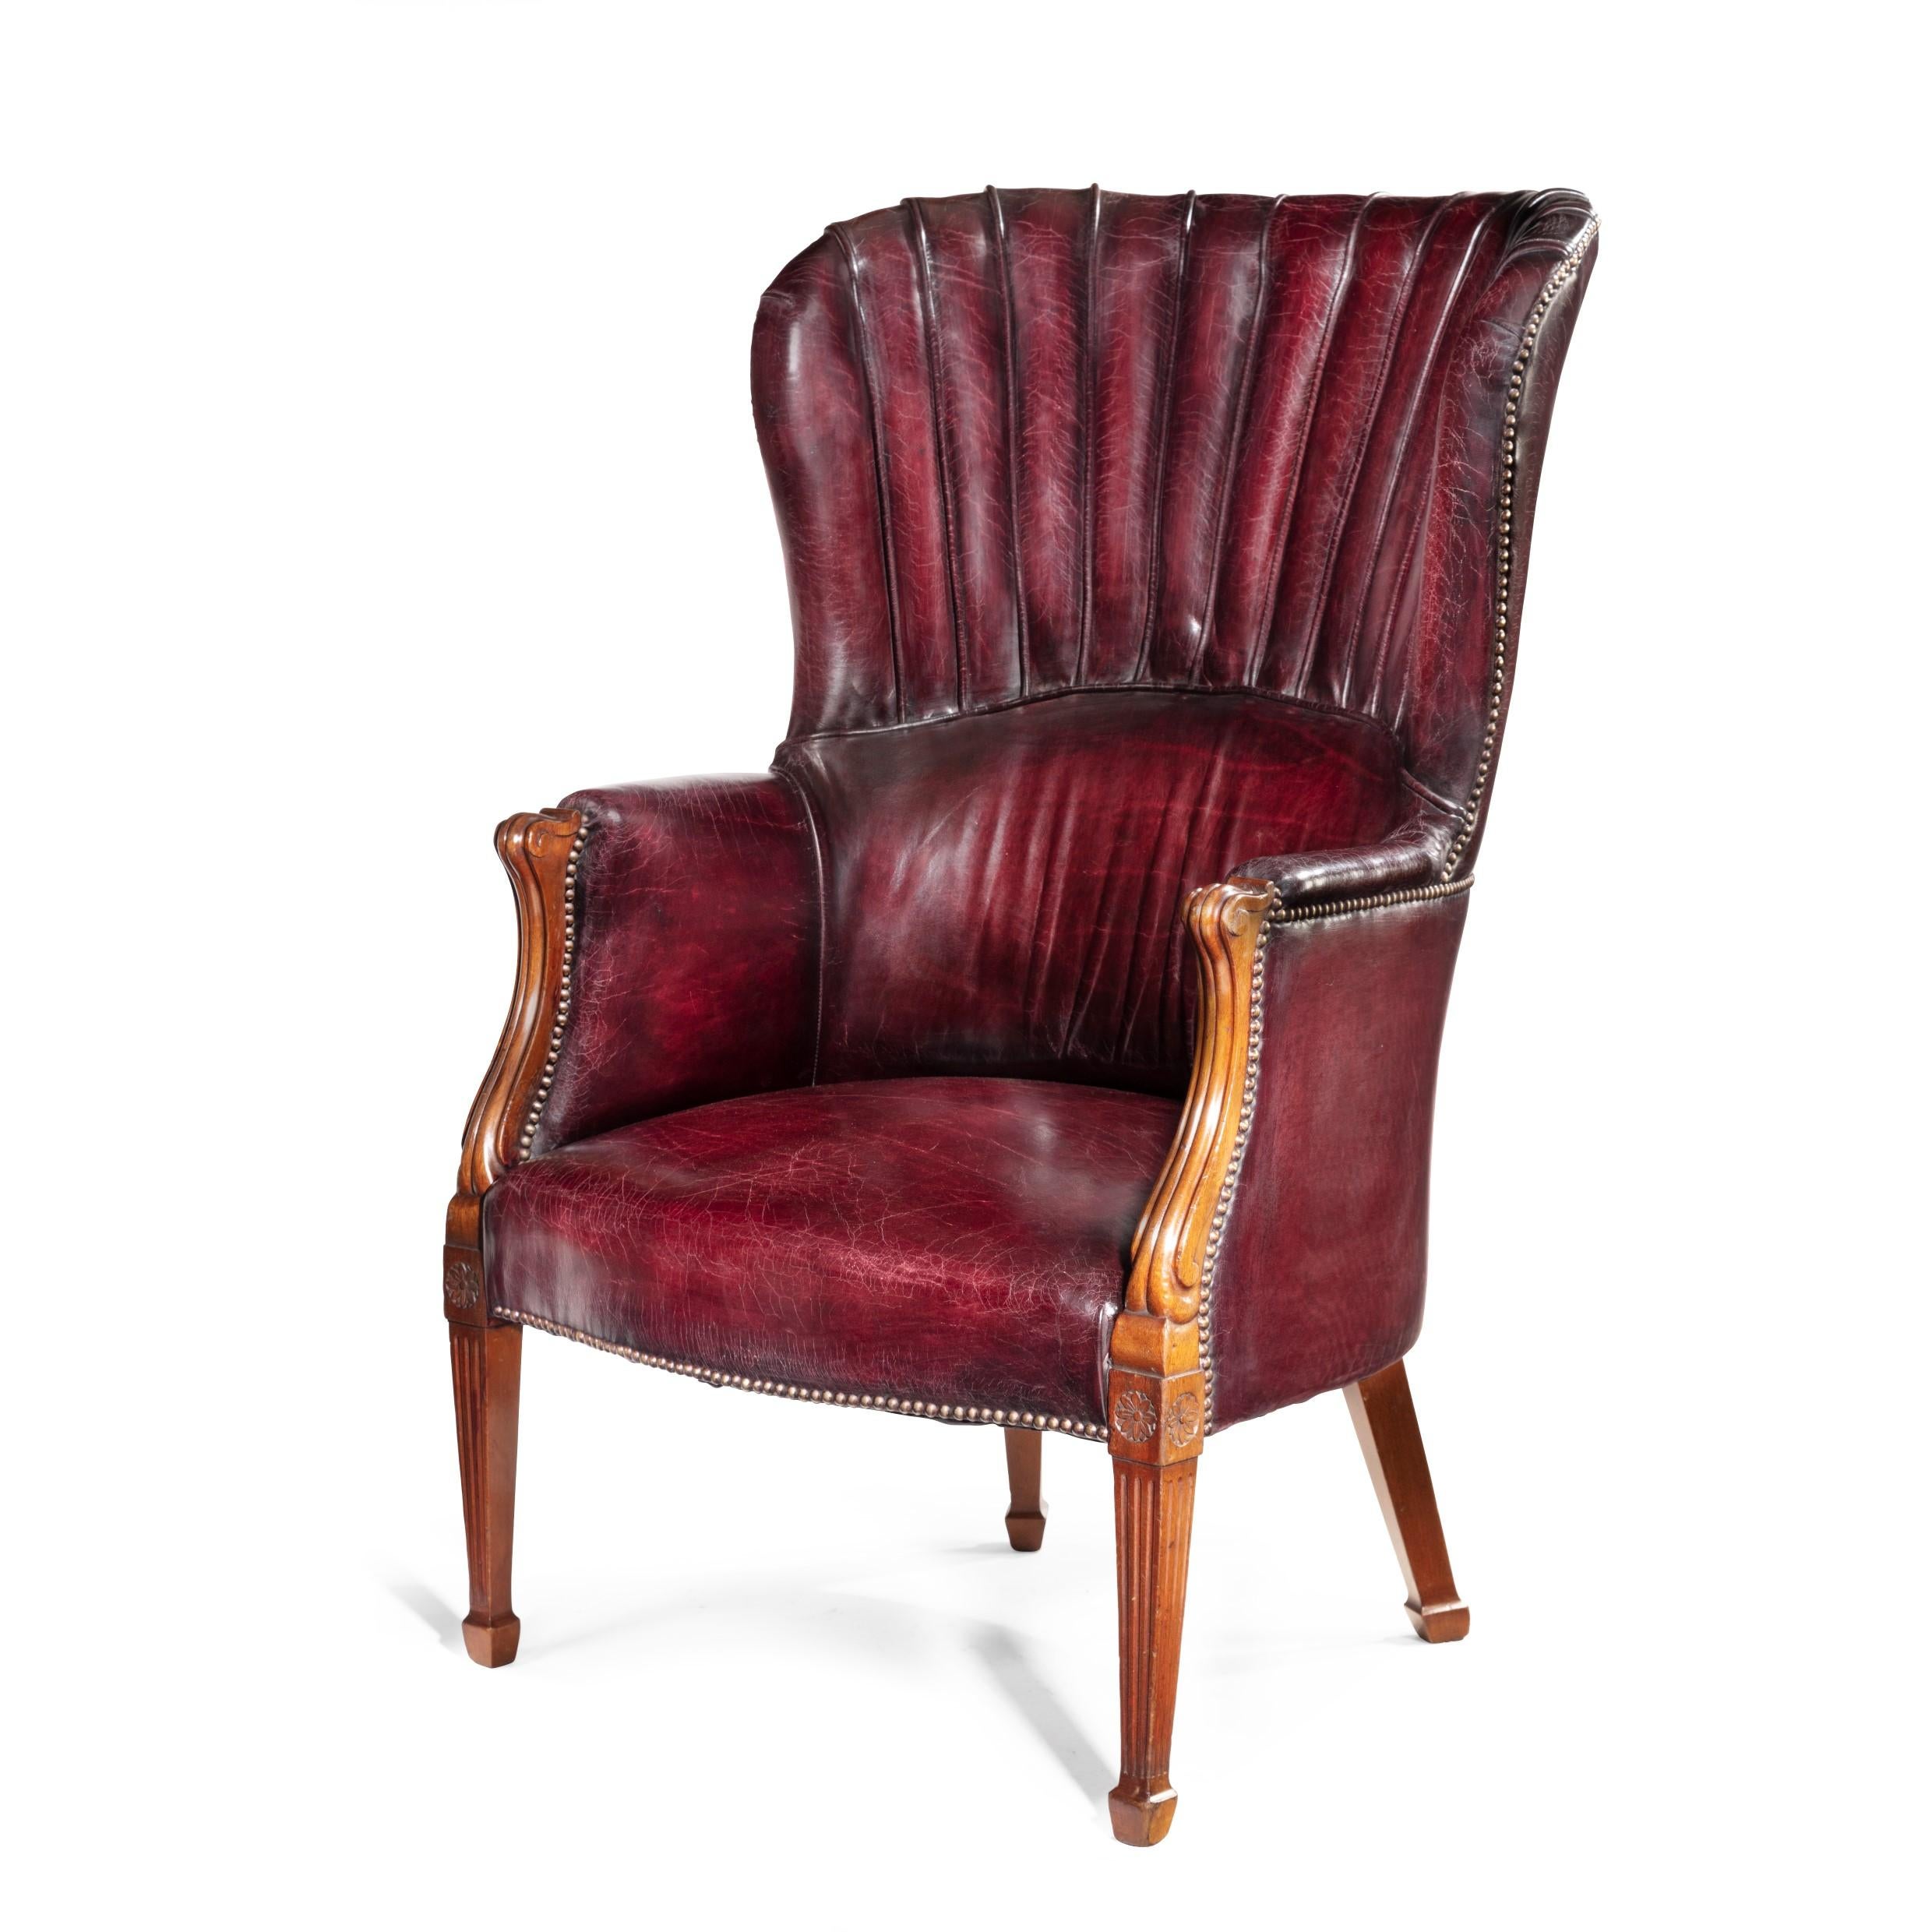 A pair of barrel-backed mahogany wing armchairs, each with carved serpentine arms and fluted square section tapering front legs with spade feet, the rear legs out-swept, reupholstered in distressed red leather. English, circa 1900.